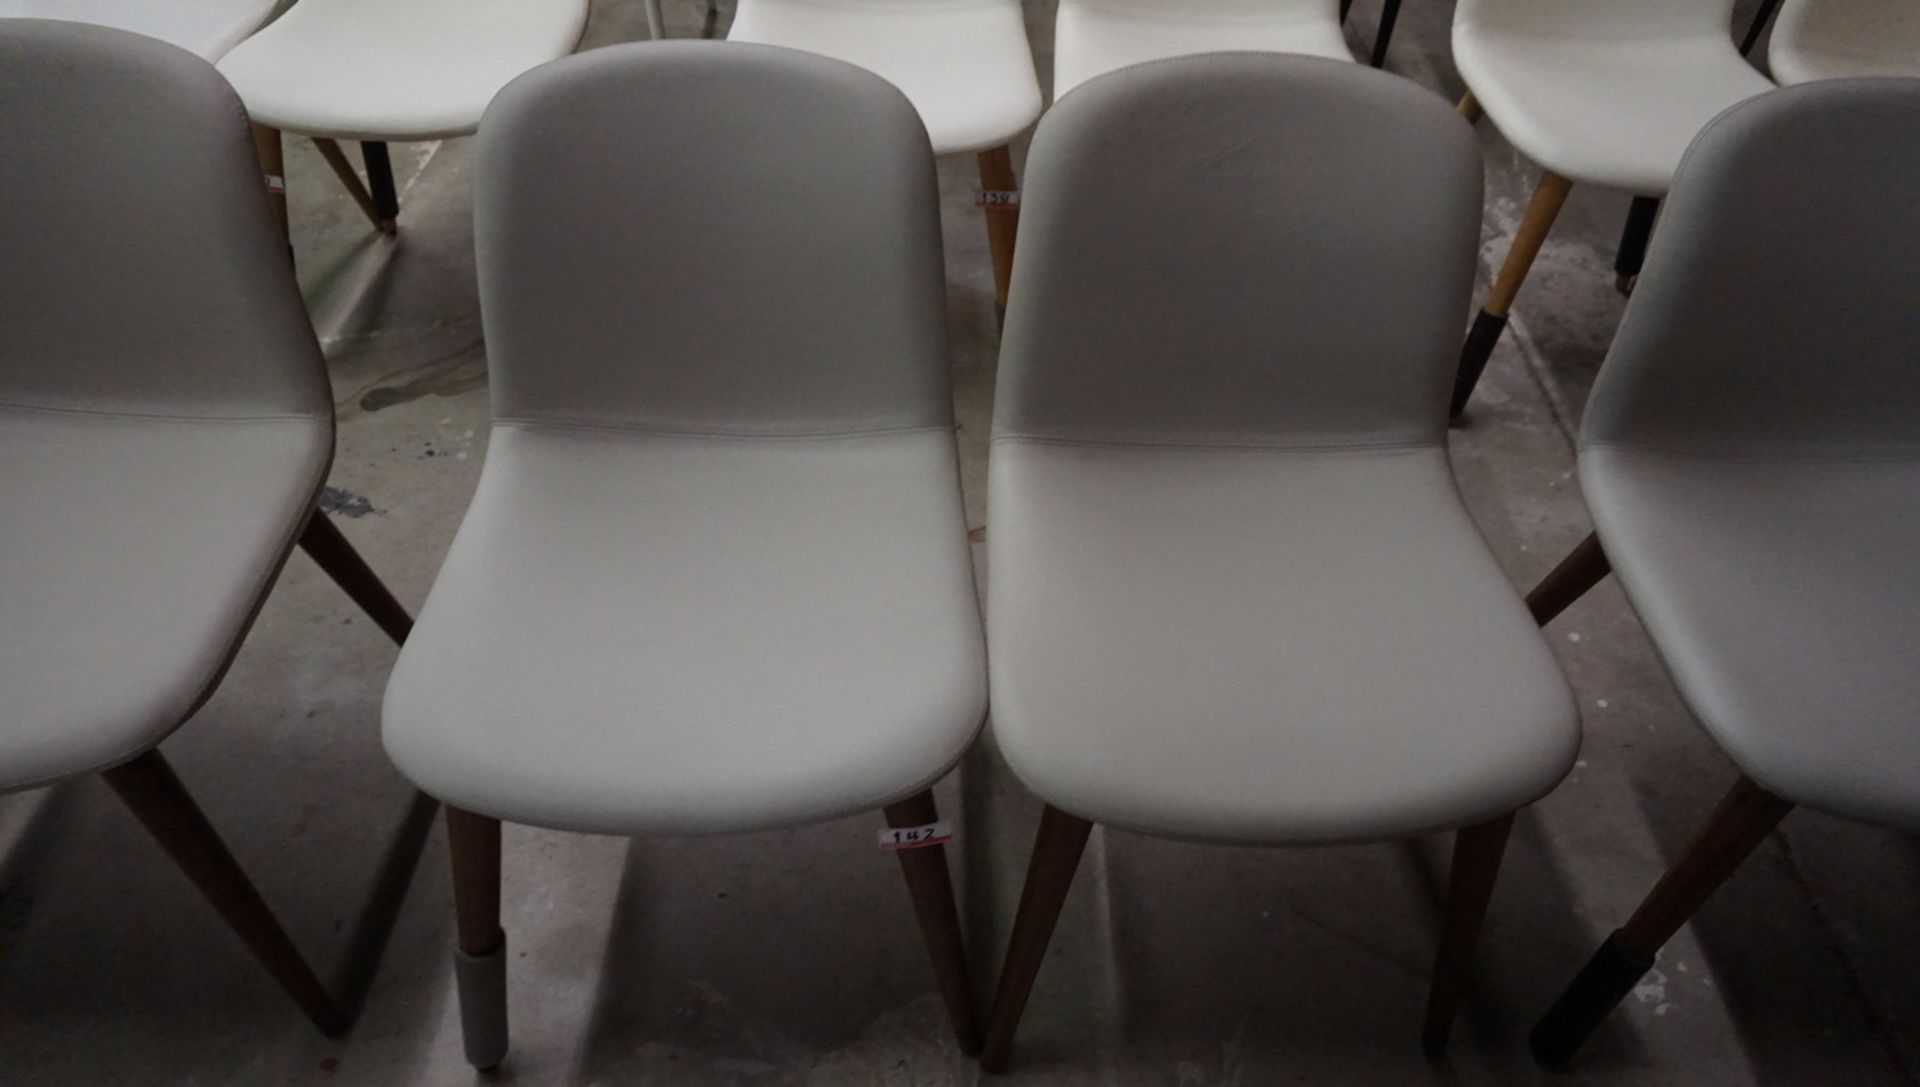 UNITS - JOBS BACCO GREY LEATHER DINING / GUEST CHAIRS (MADE IN ITALY) (MSRP $995) - Image 2 of 2